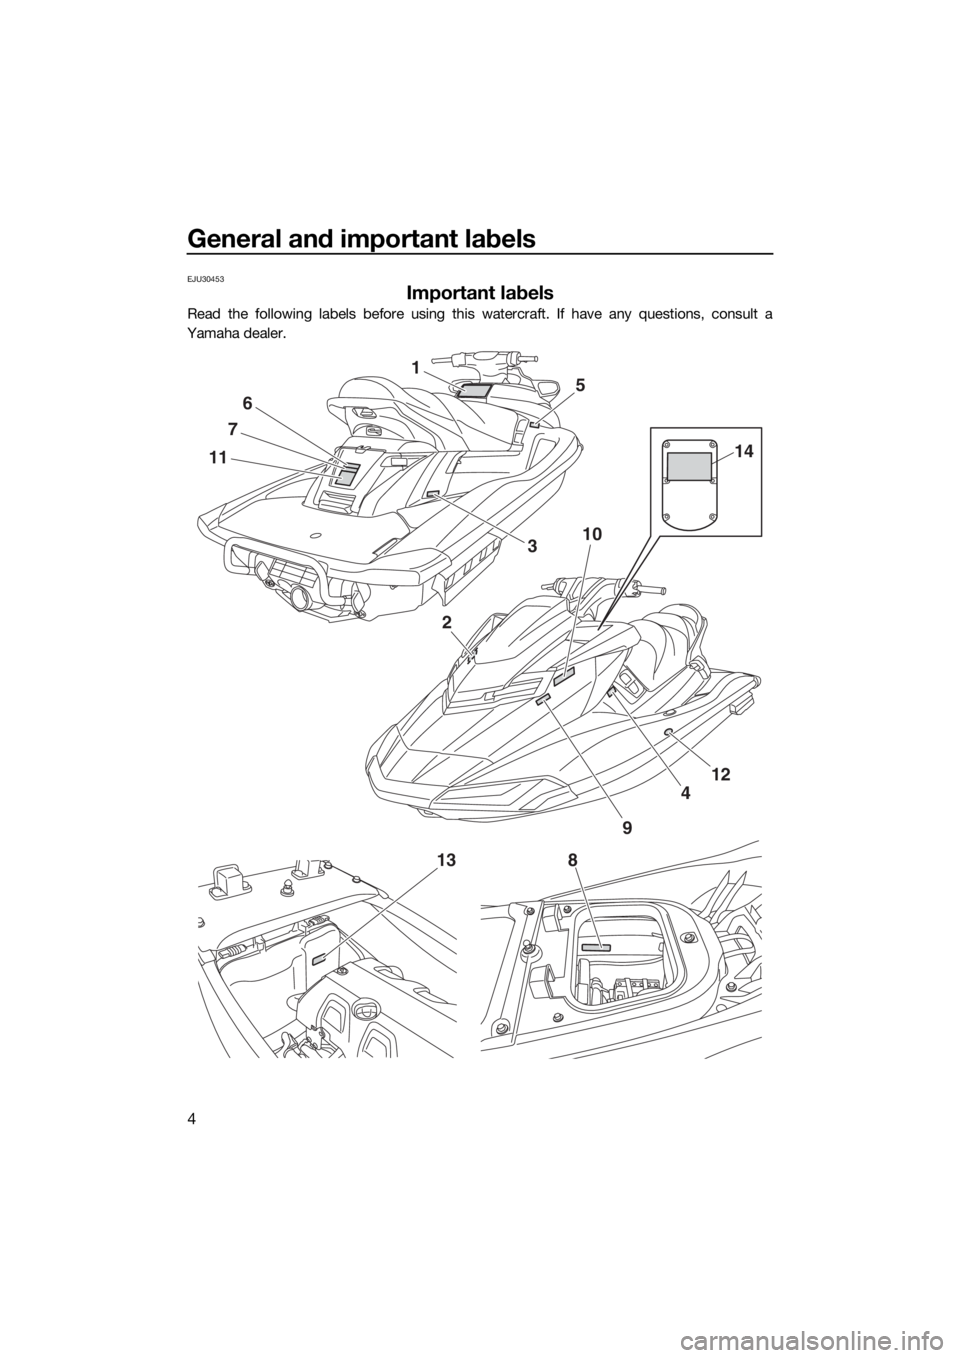 YAMAHA FX HO 2017  Owners Manual General and important labels
4
EJU30453
Important labels
Read the following labels before using this watercraft. If have any questions, consult a
Yamaha dealer.
1
11
7
6
10
2
8
4
12
9
5
3
14
13
UF2T77